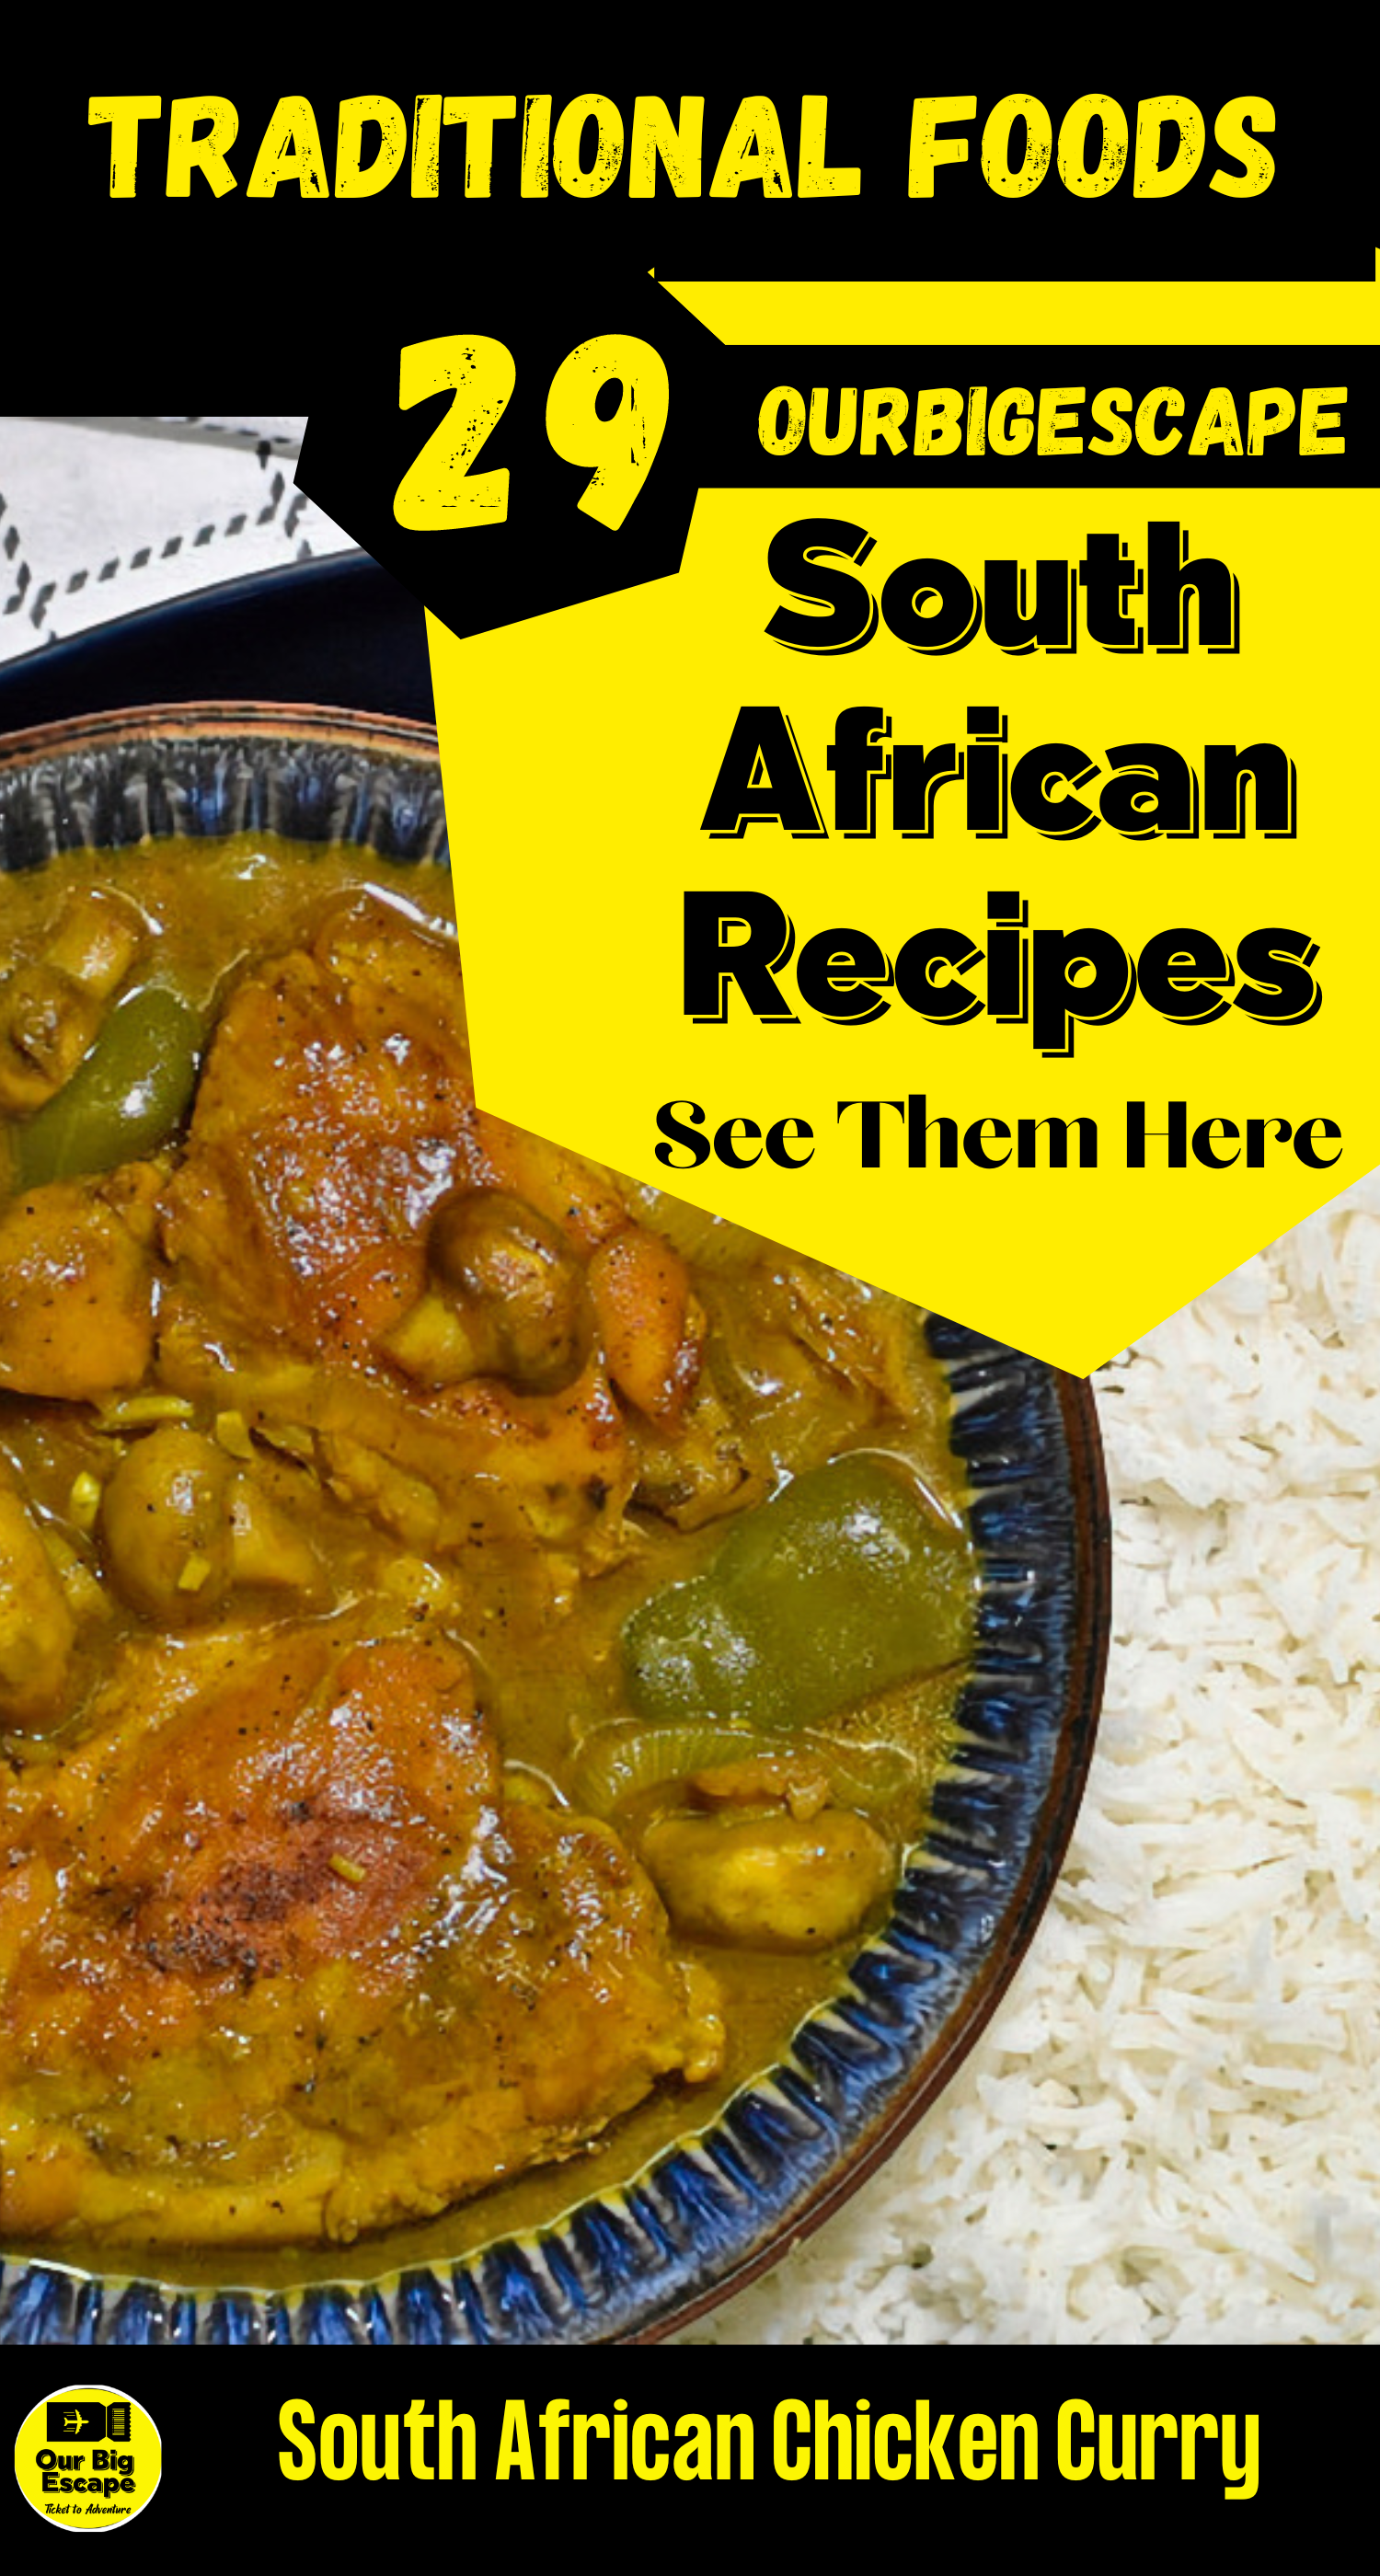 29 South African Recipes - South African Chicken Curry